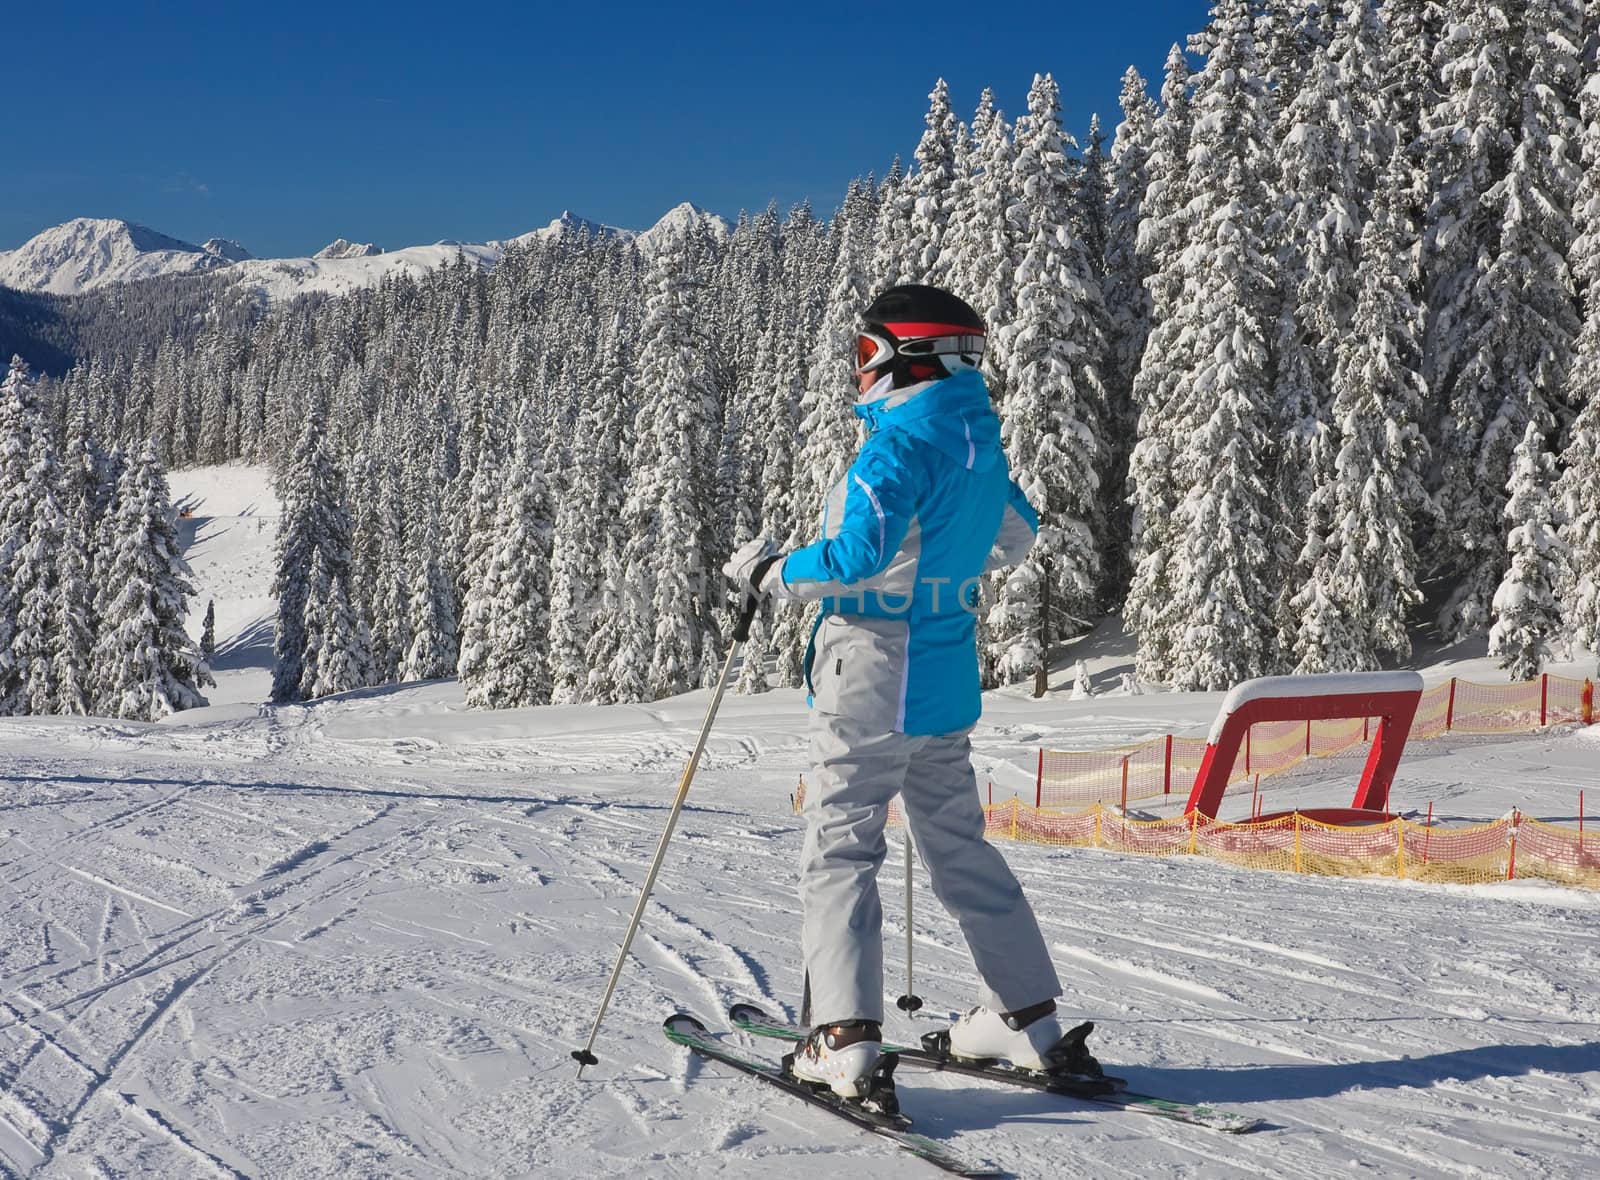 The woman at the view winter mountain. Ski resort Schladming . A by nikolpetr